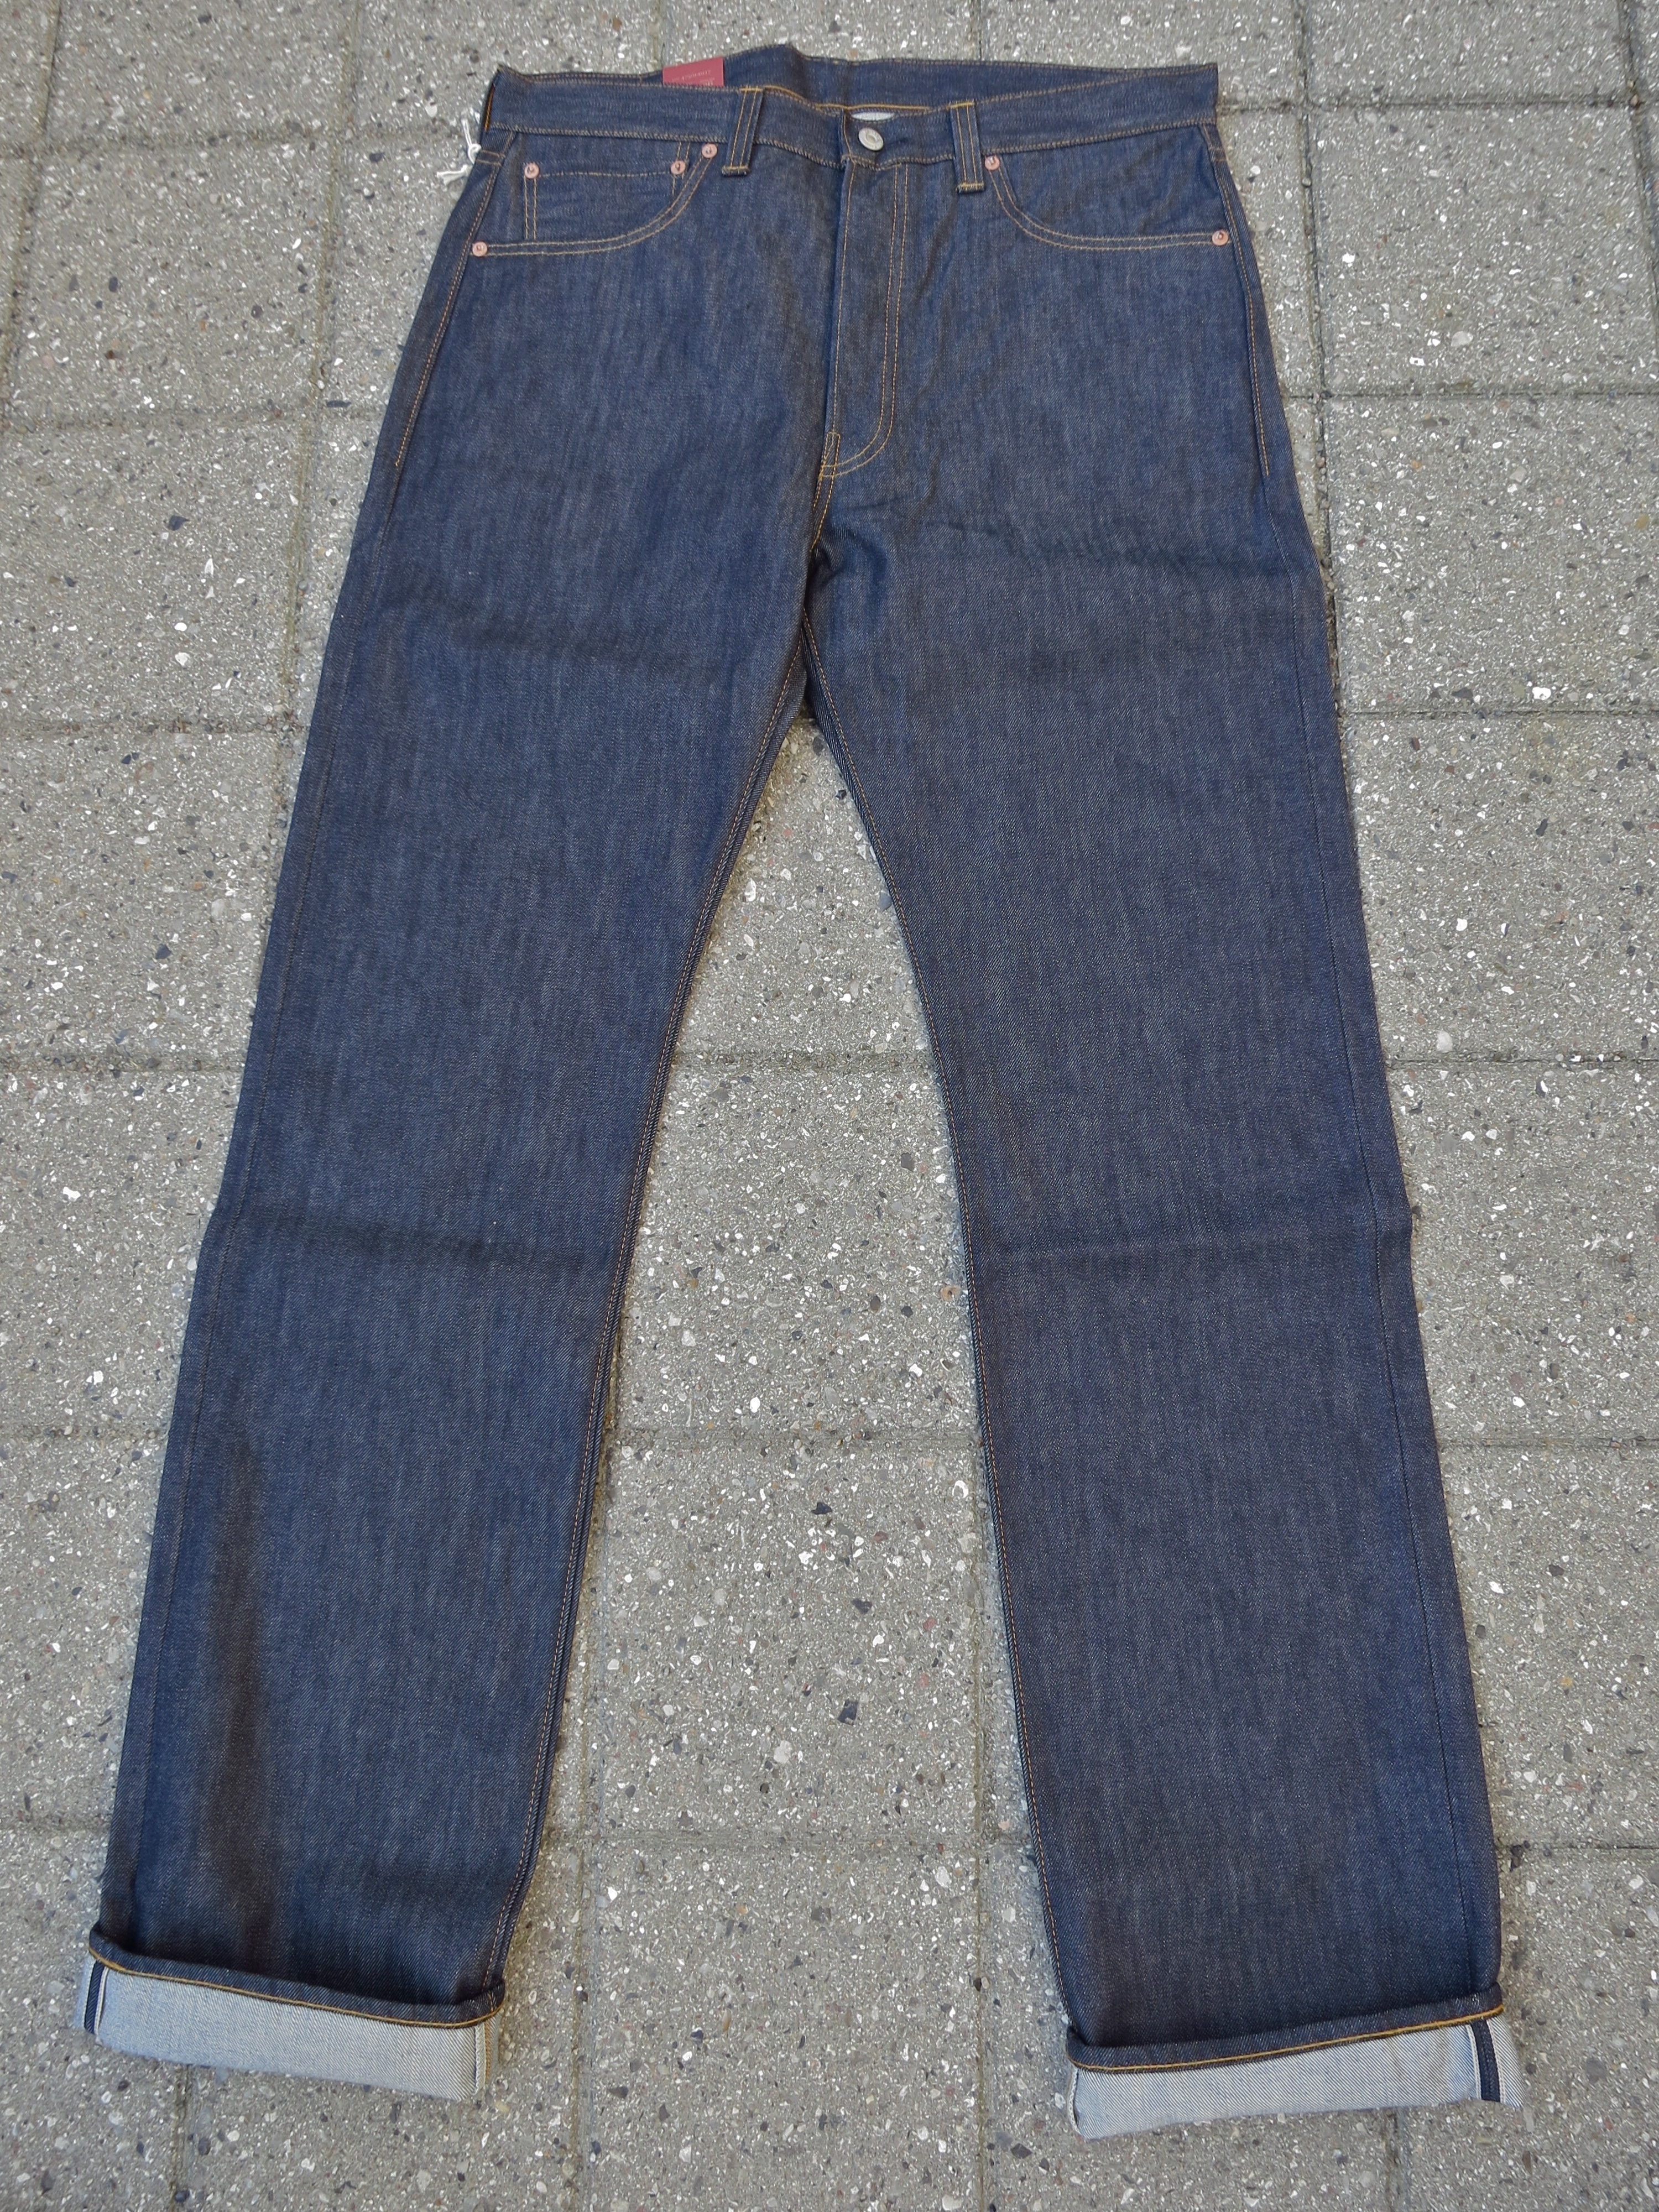 Levi's Vintage Clothing Wear & Tear Project - Rope Dye Crafted Goods